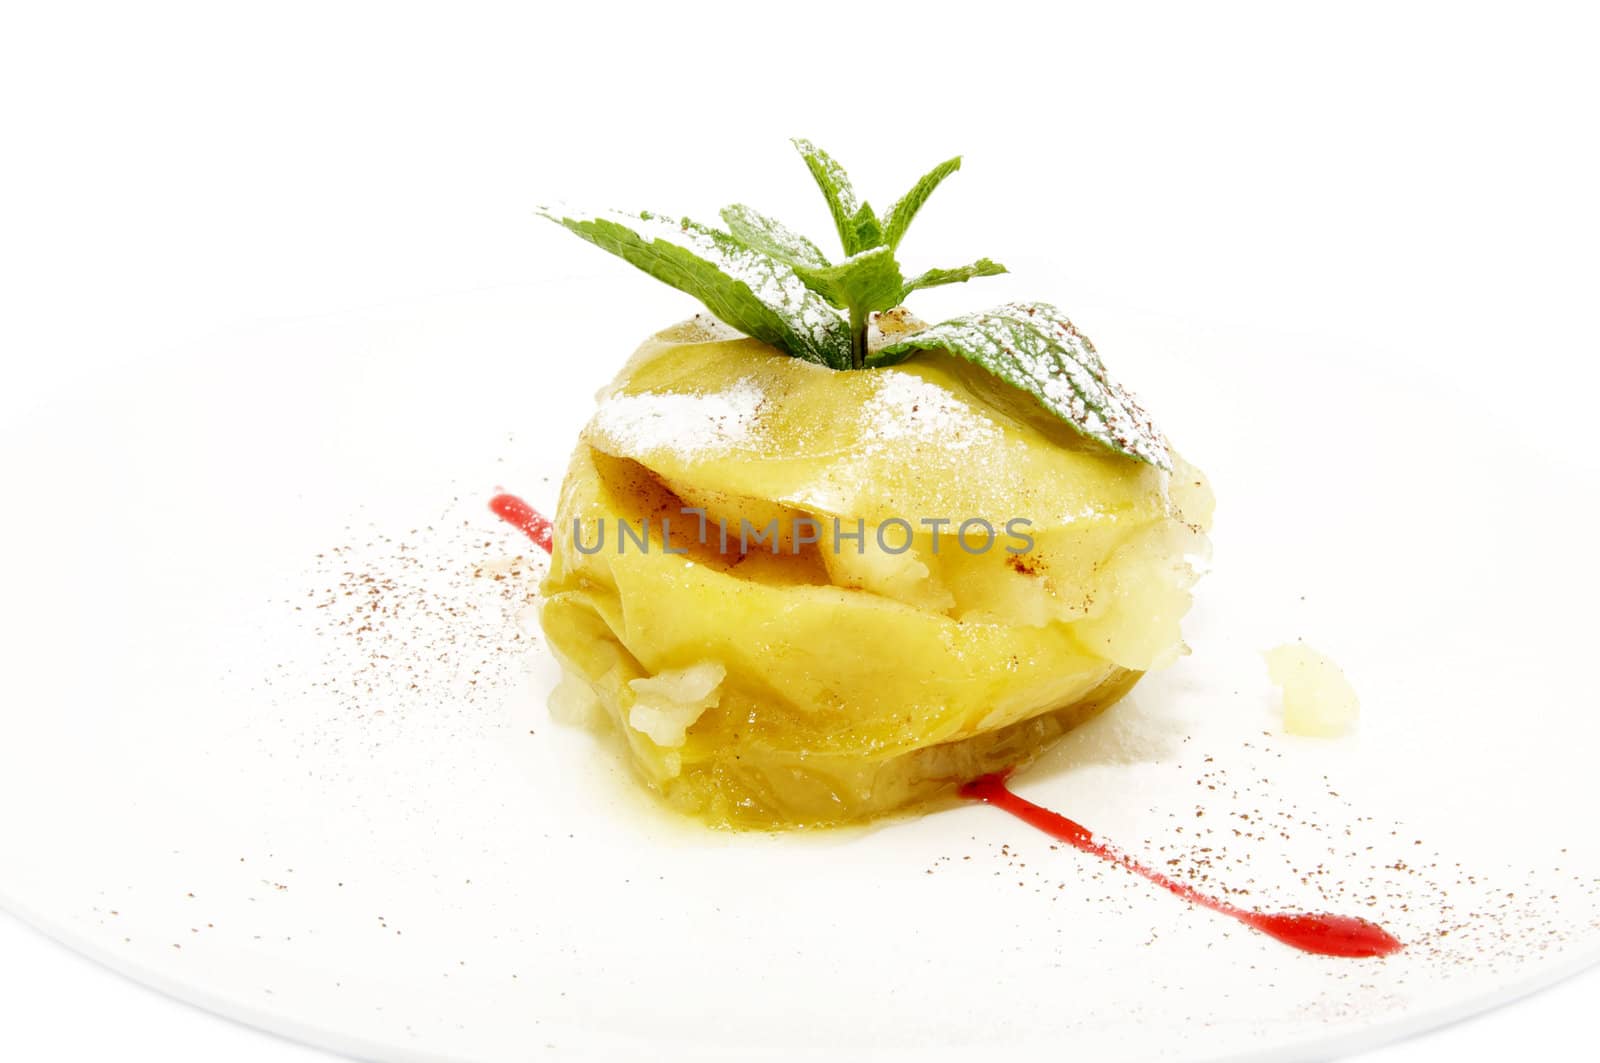 Baked apple with cinnamon sauce on a white background